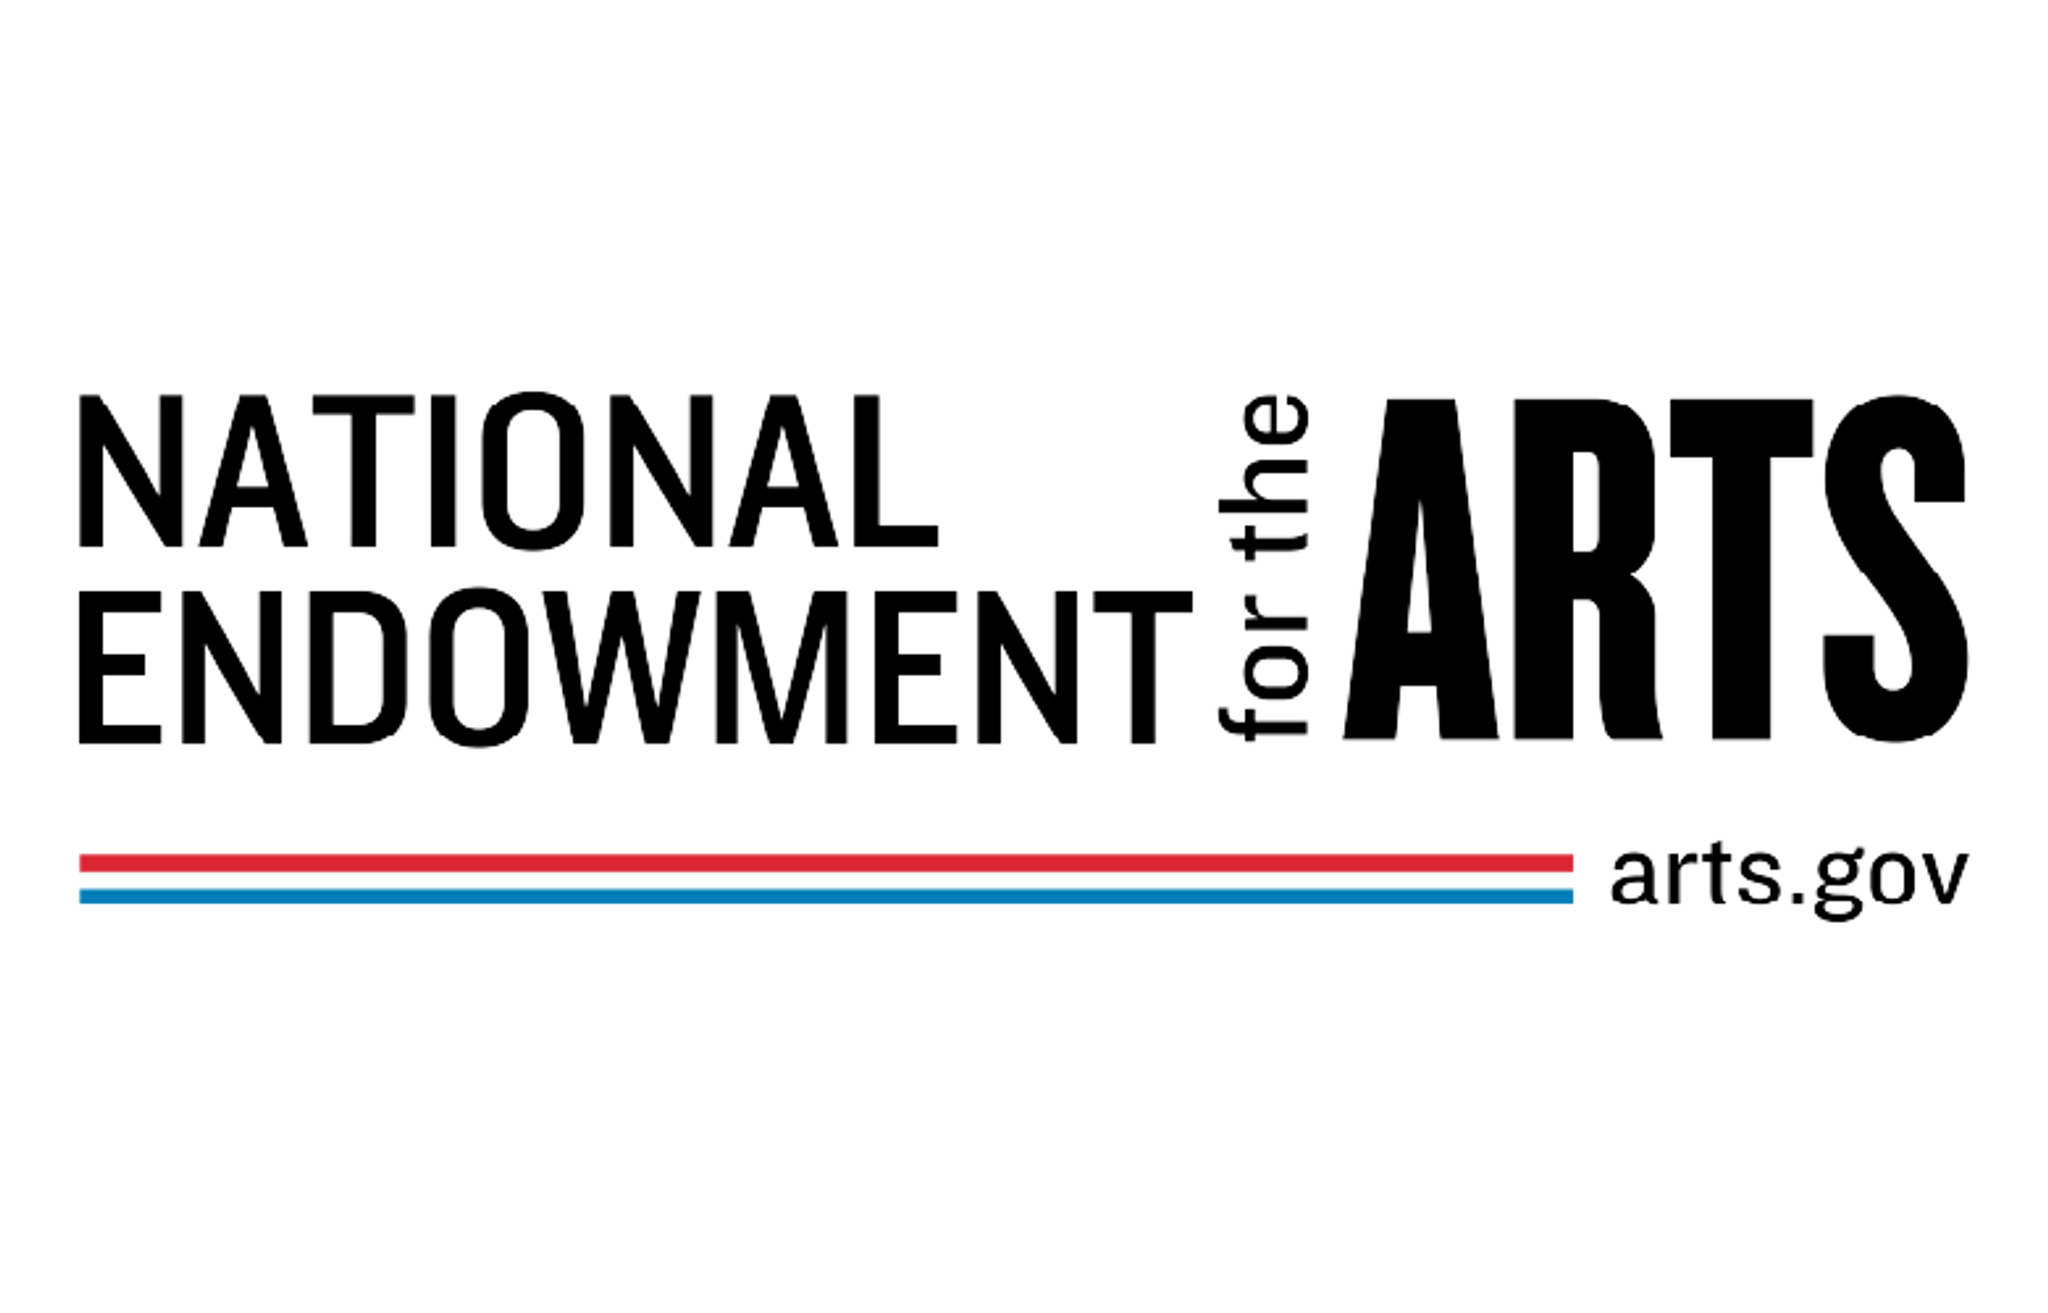 The National Endowment for the Arts logo, with the organization's name above two horizontal lines of blue and red ending in the URL arts.gov